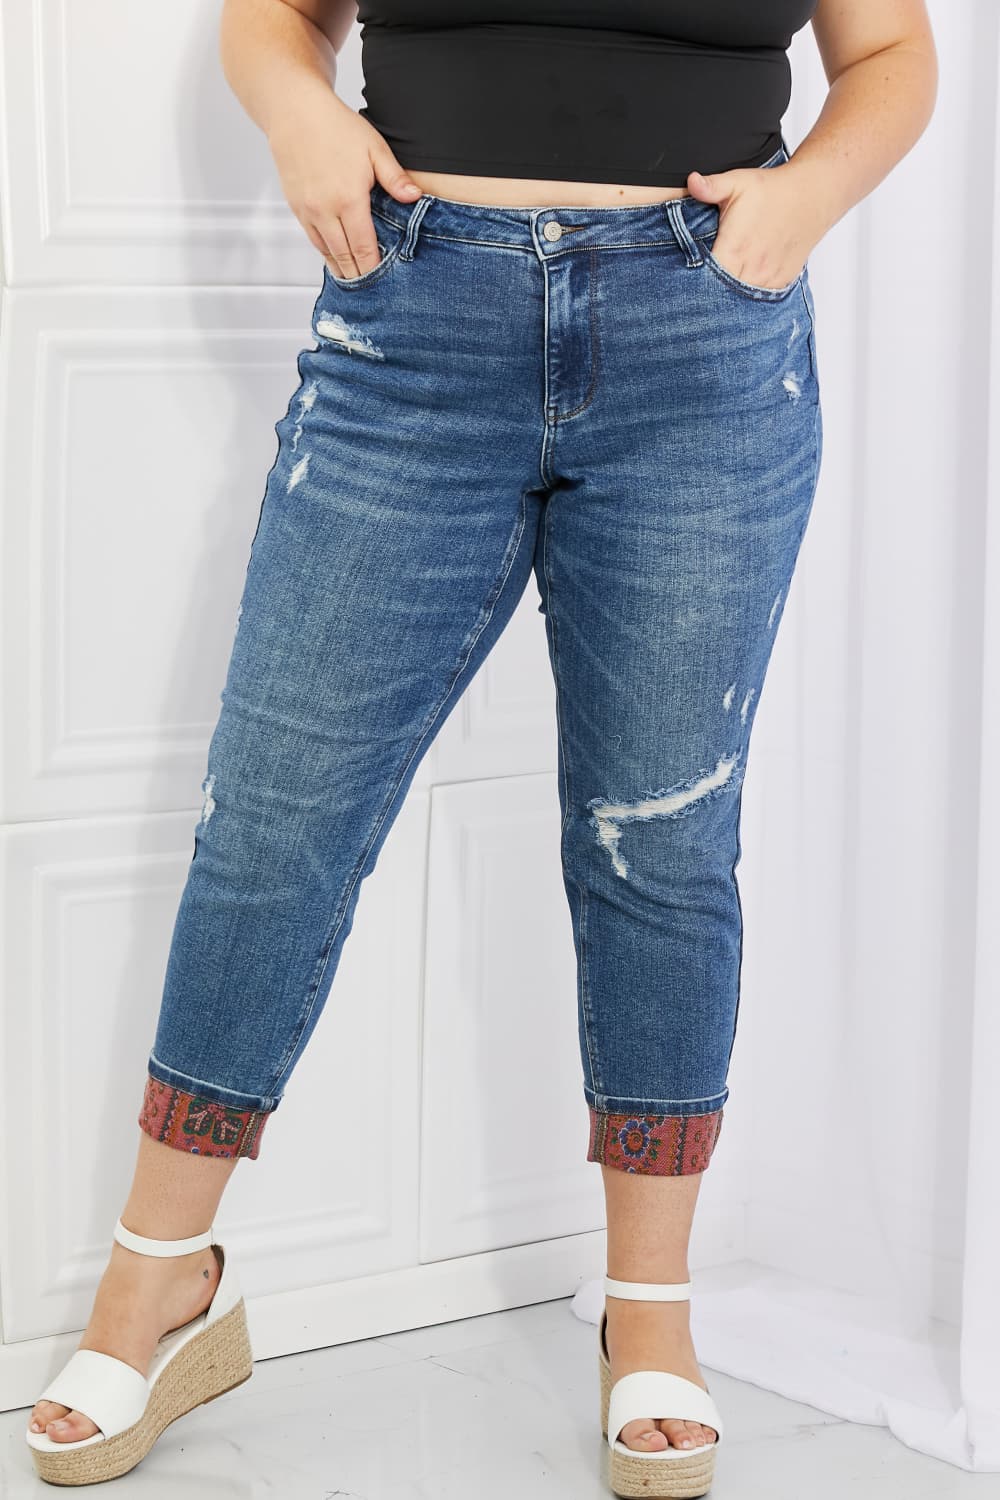 Judy Blue Gina Full Size Mid Rise Paisley Patch Cuff Boyfriend Jeans - Mulberry Skies